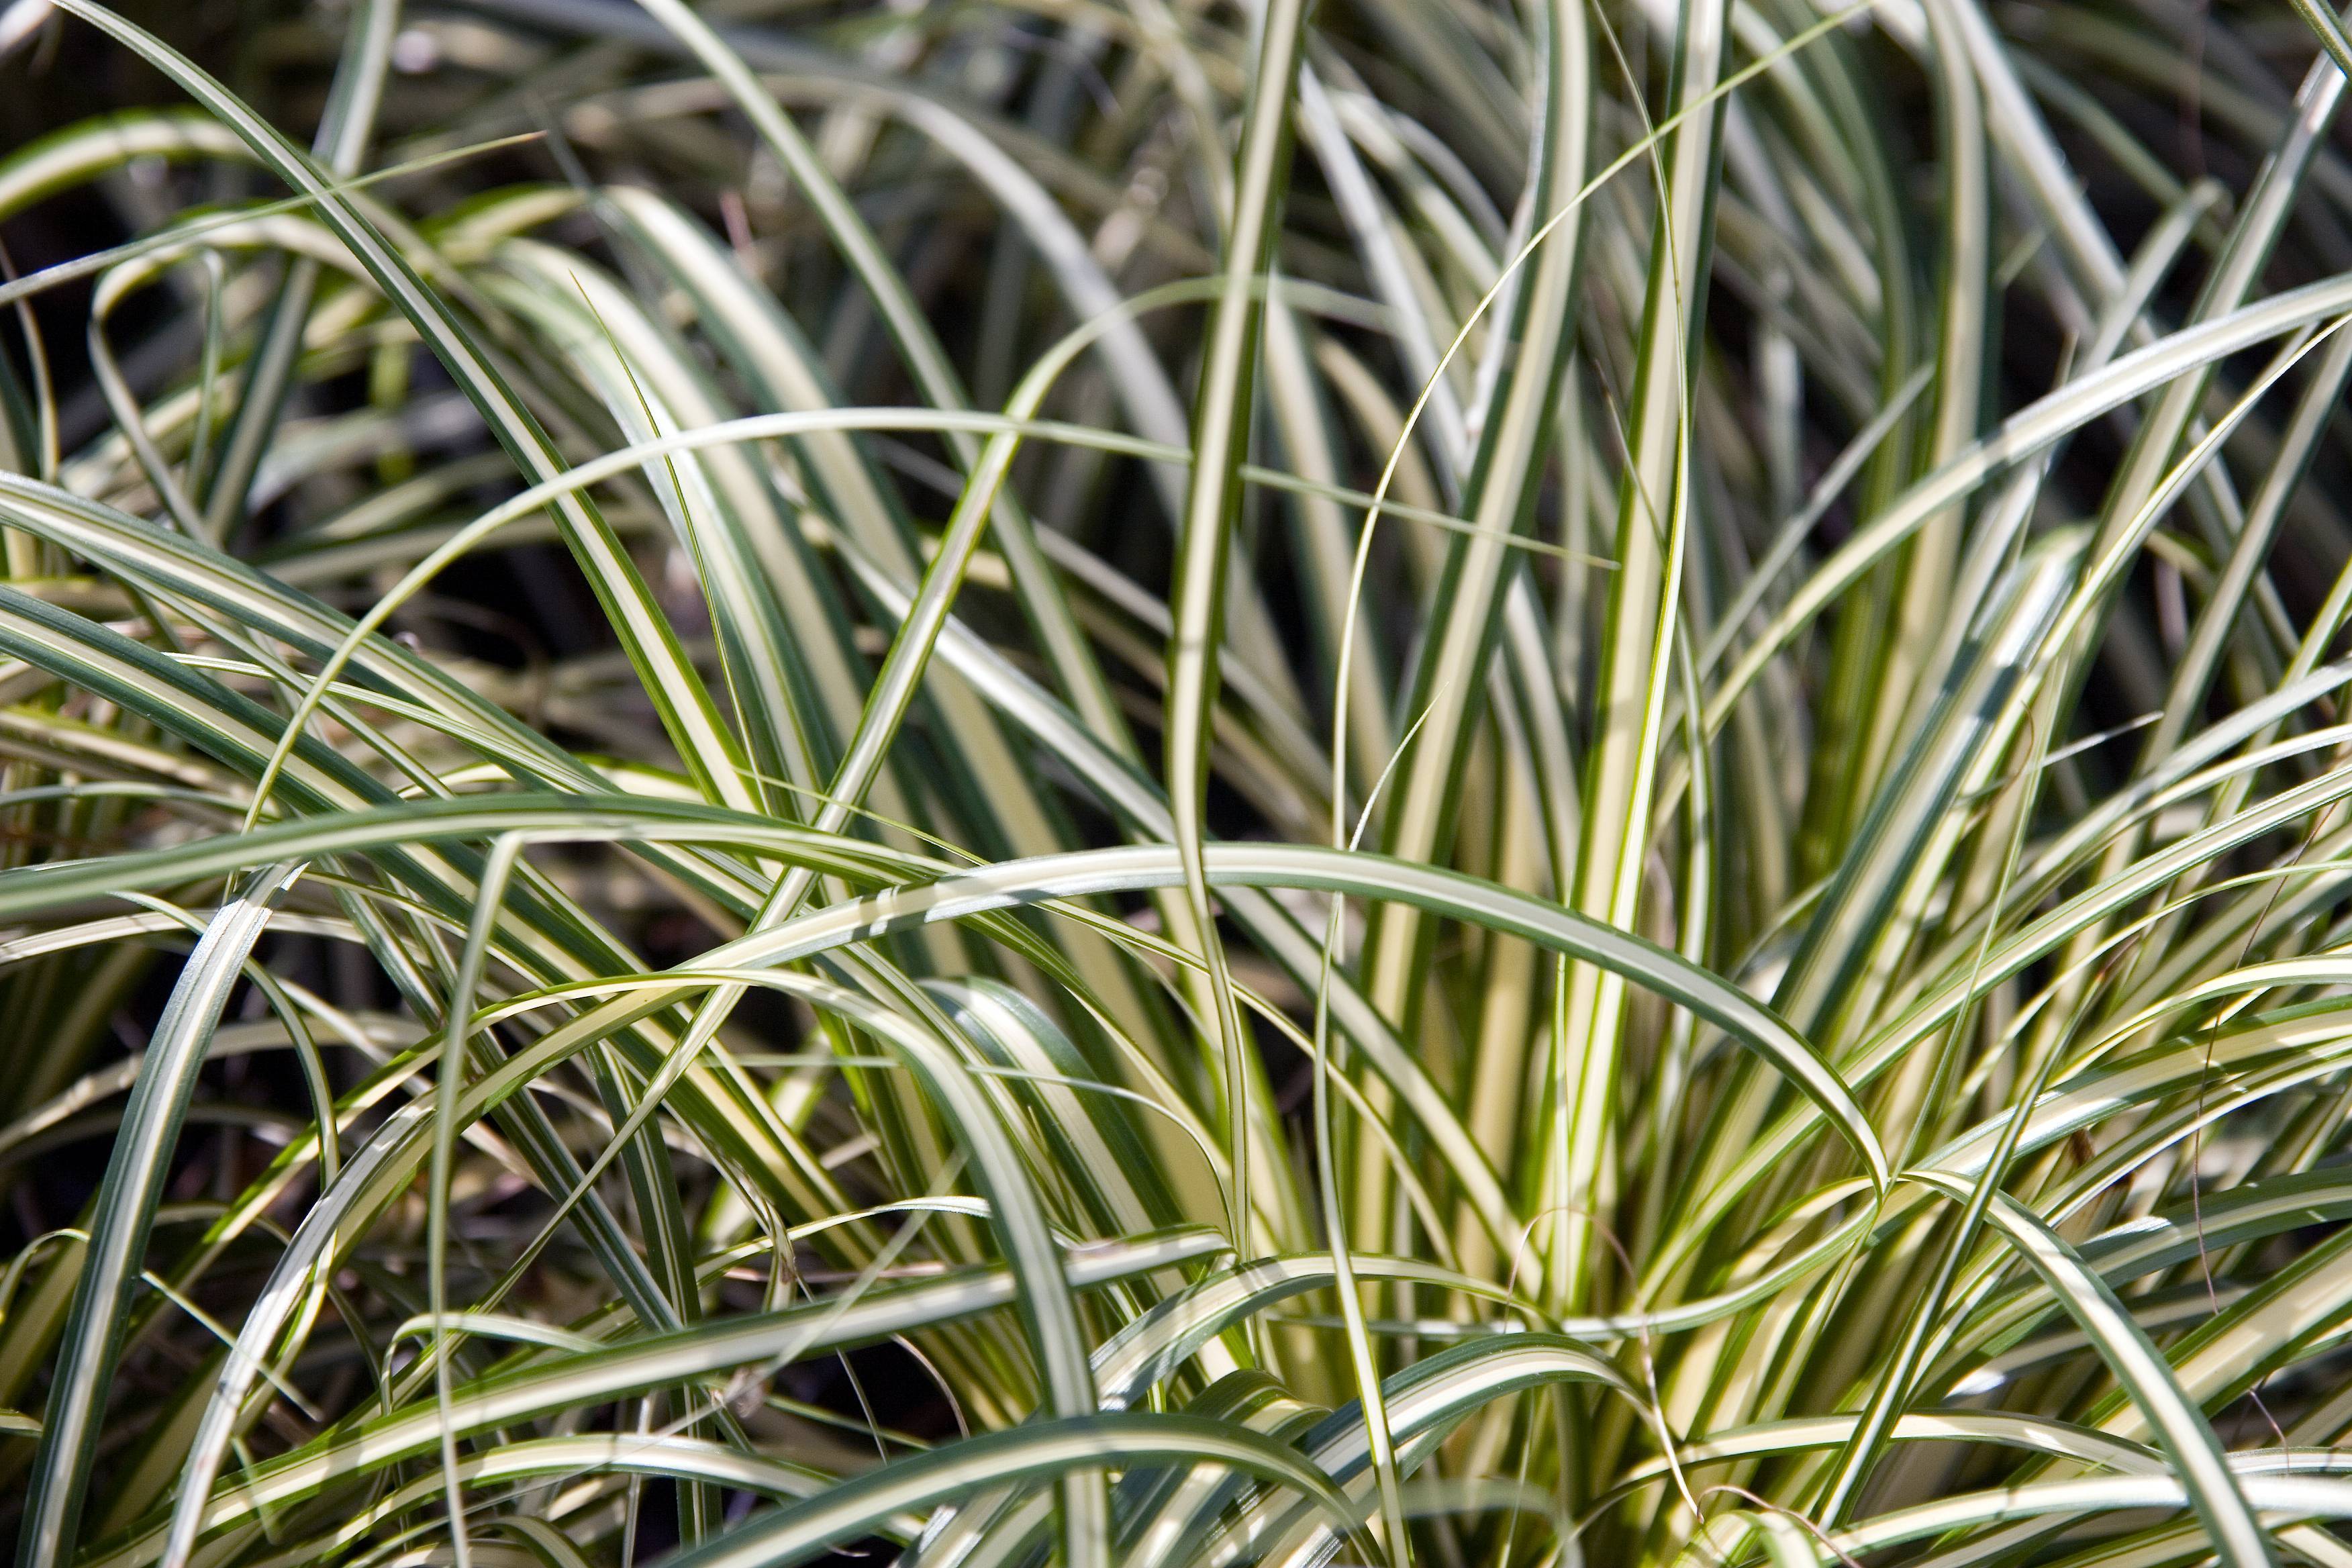 Creamy-green striped leaves arranged in clumps.